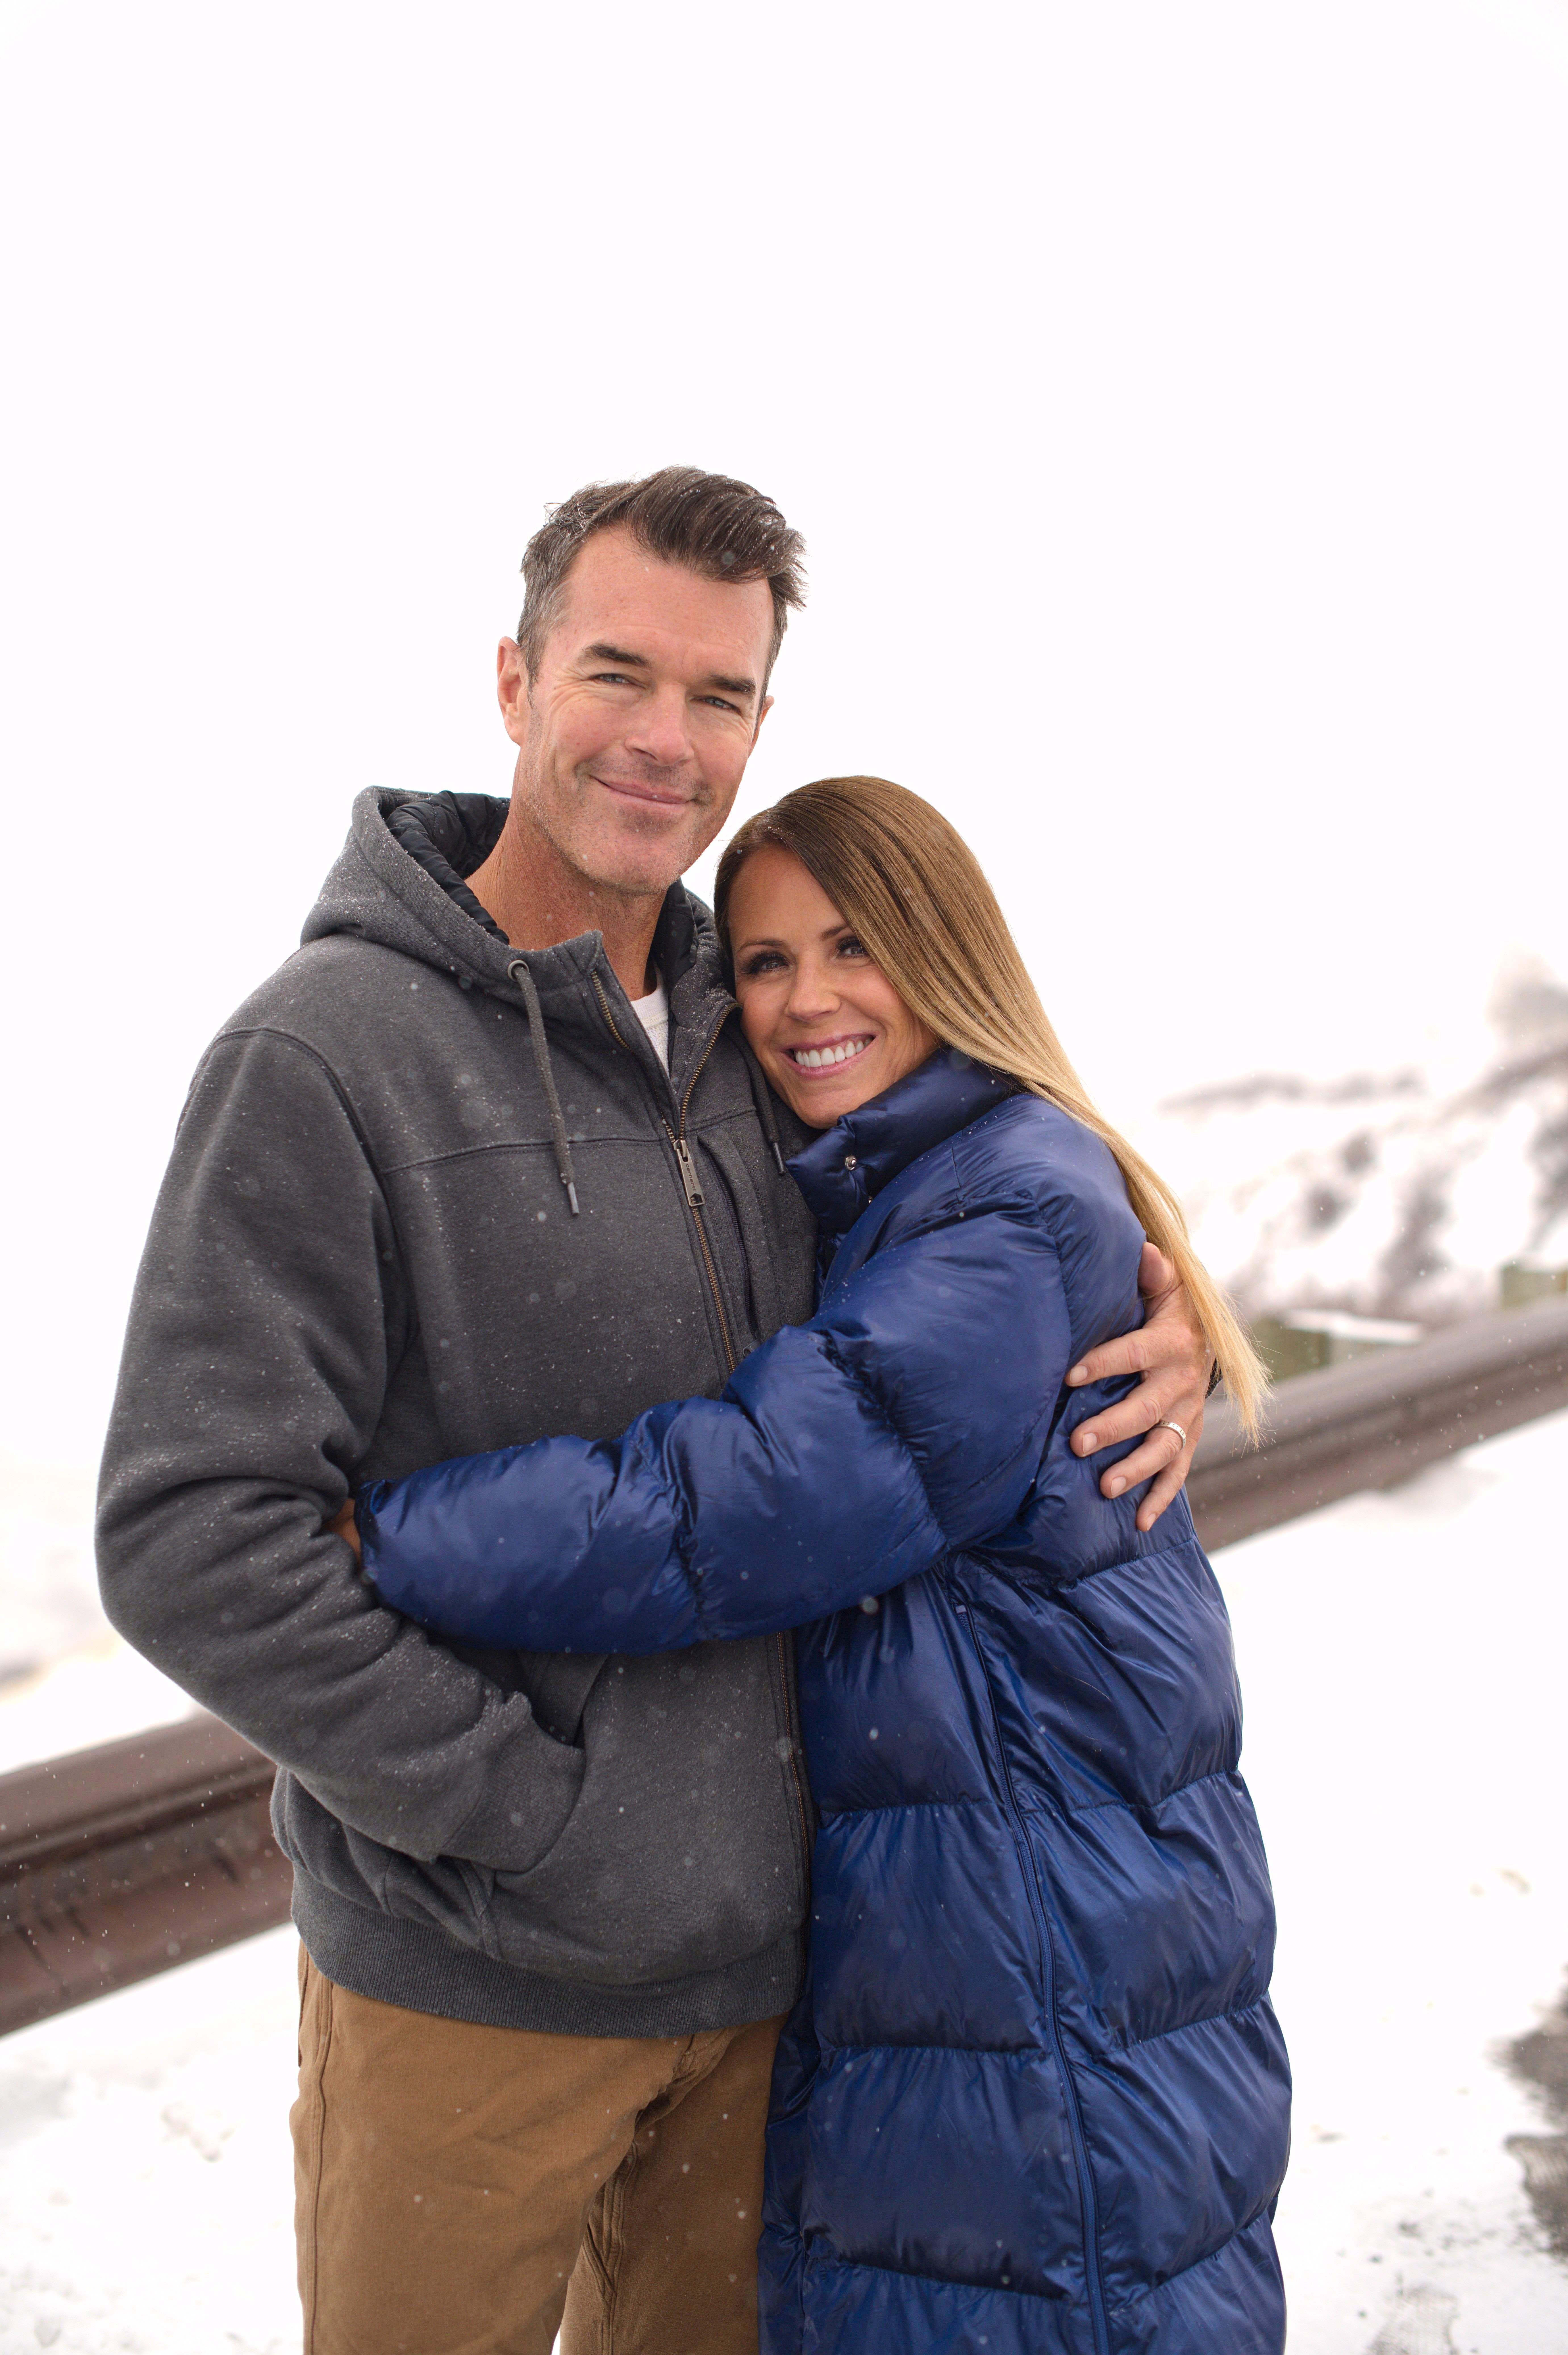 Purely Inspired® partners with reality TV dating show legends, Trista and Ryan Sutter